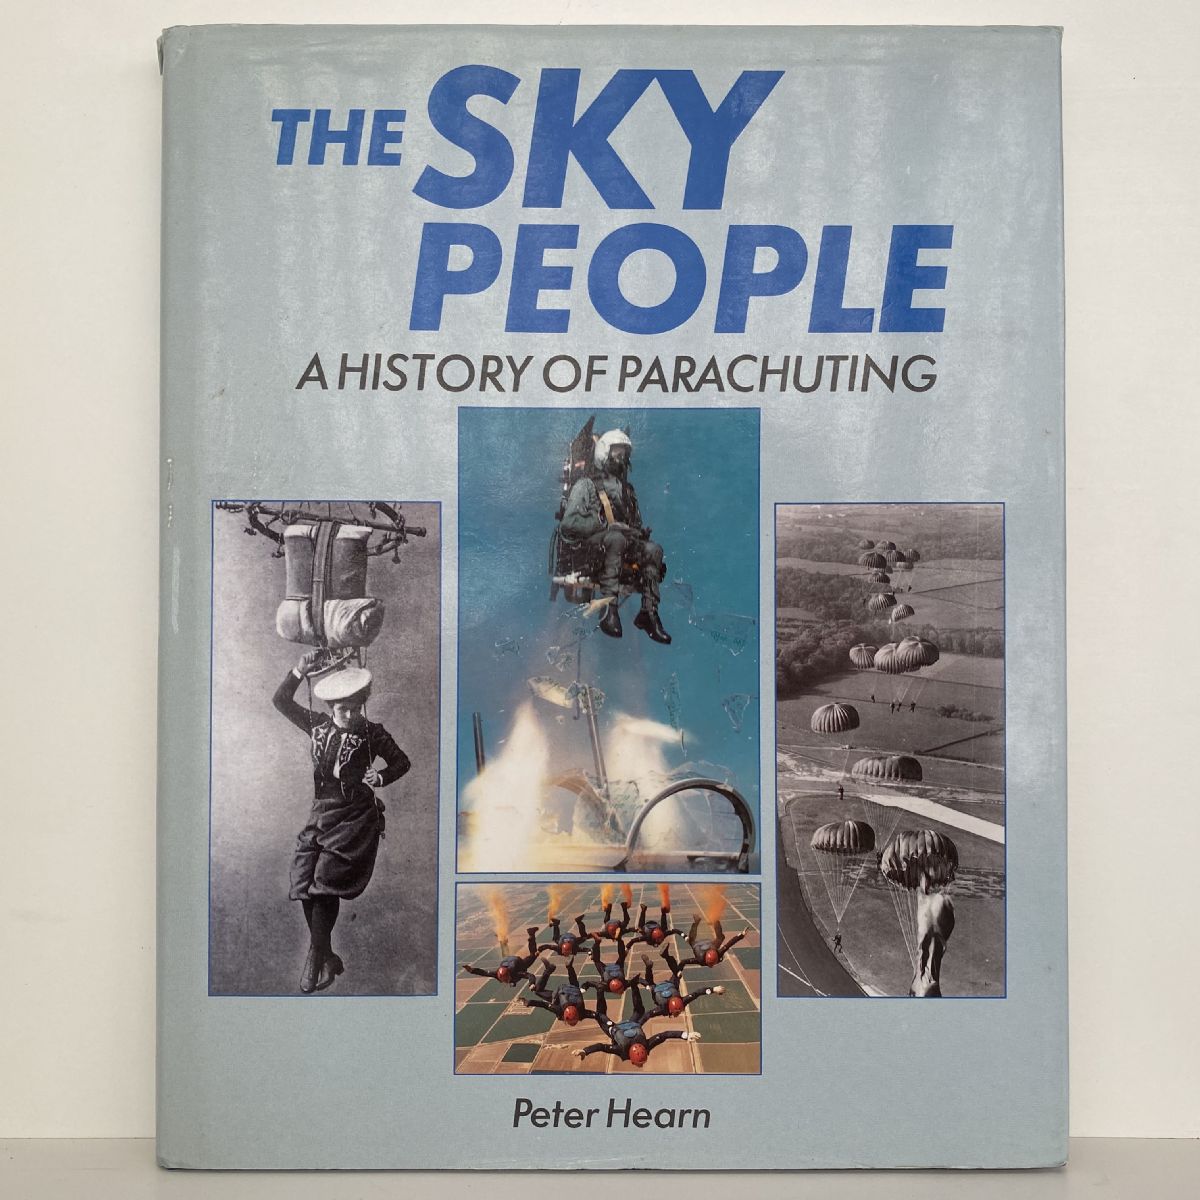 THE SKY PEOPLE: A History of Parachuting